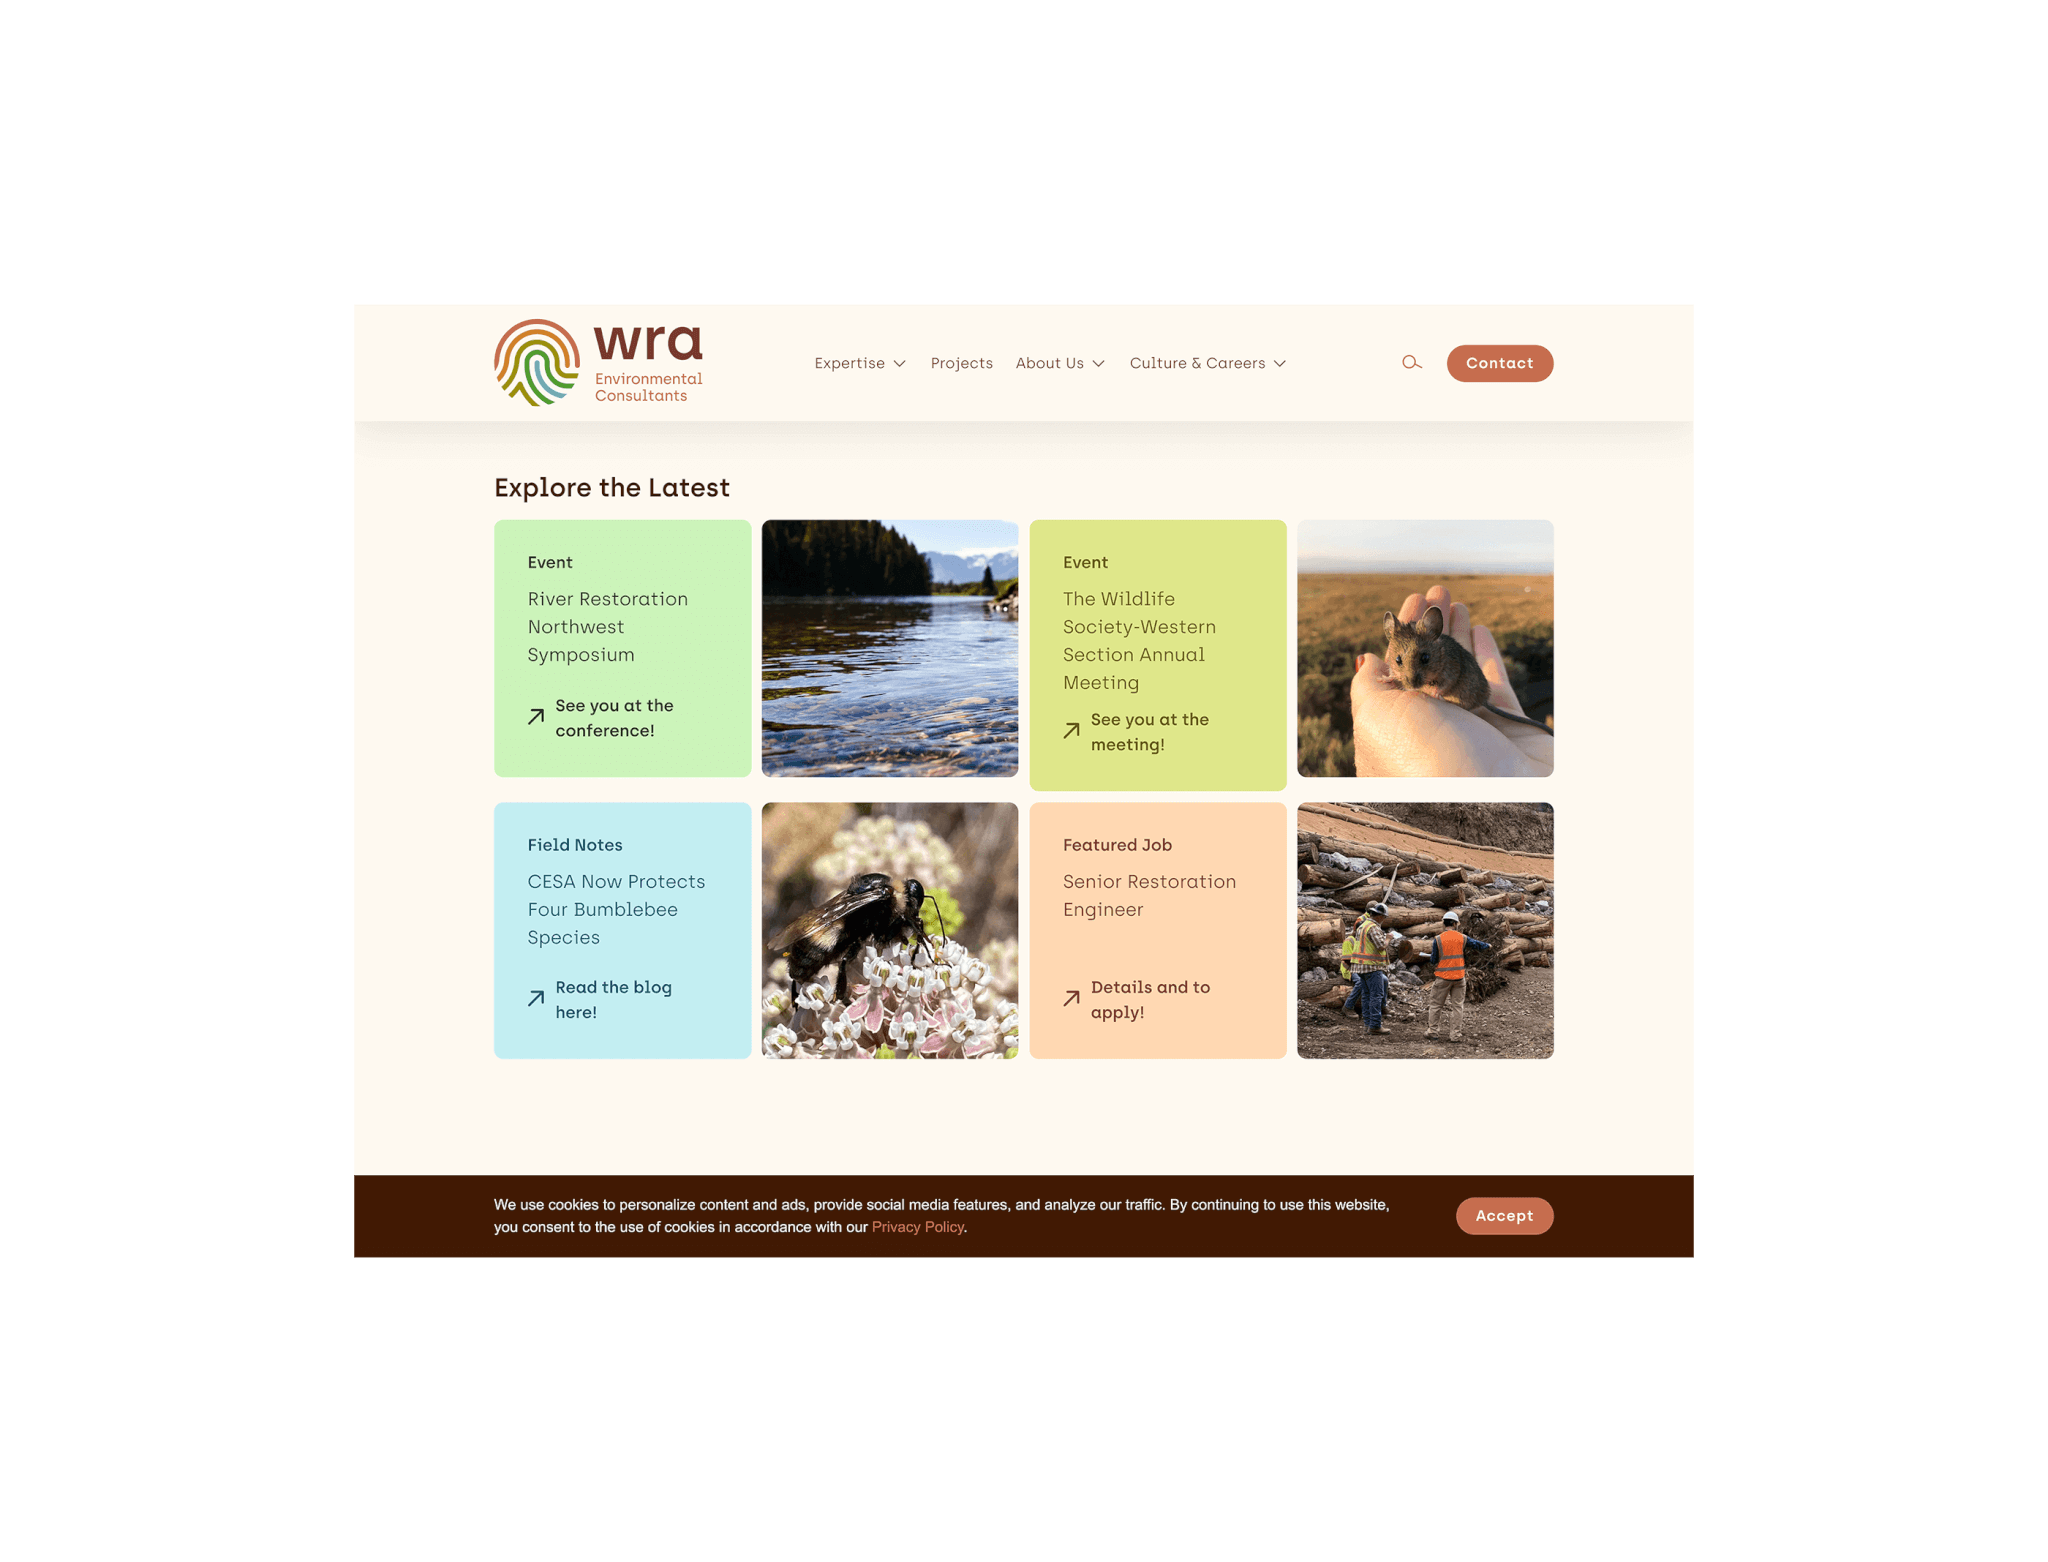 A page from WRA website showing images and text